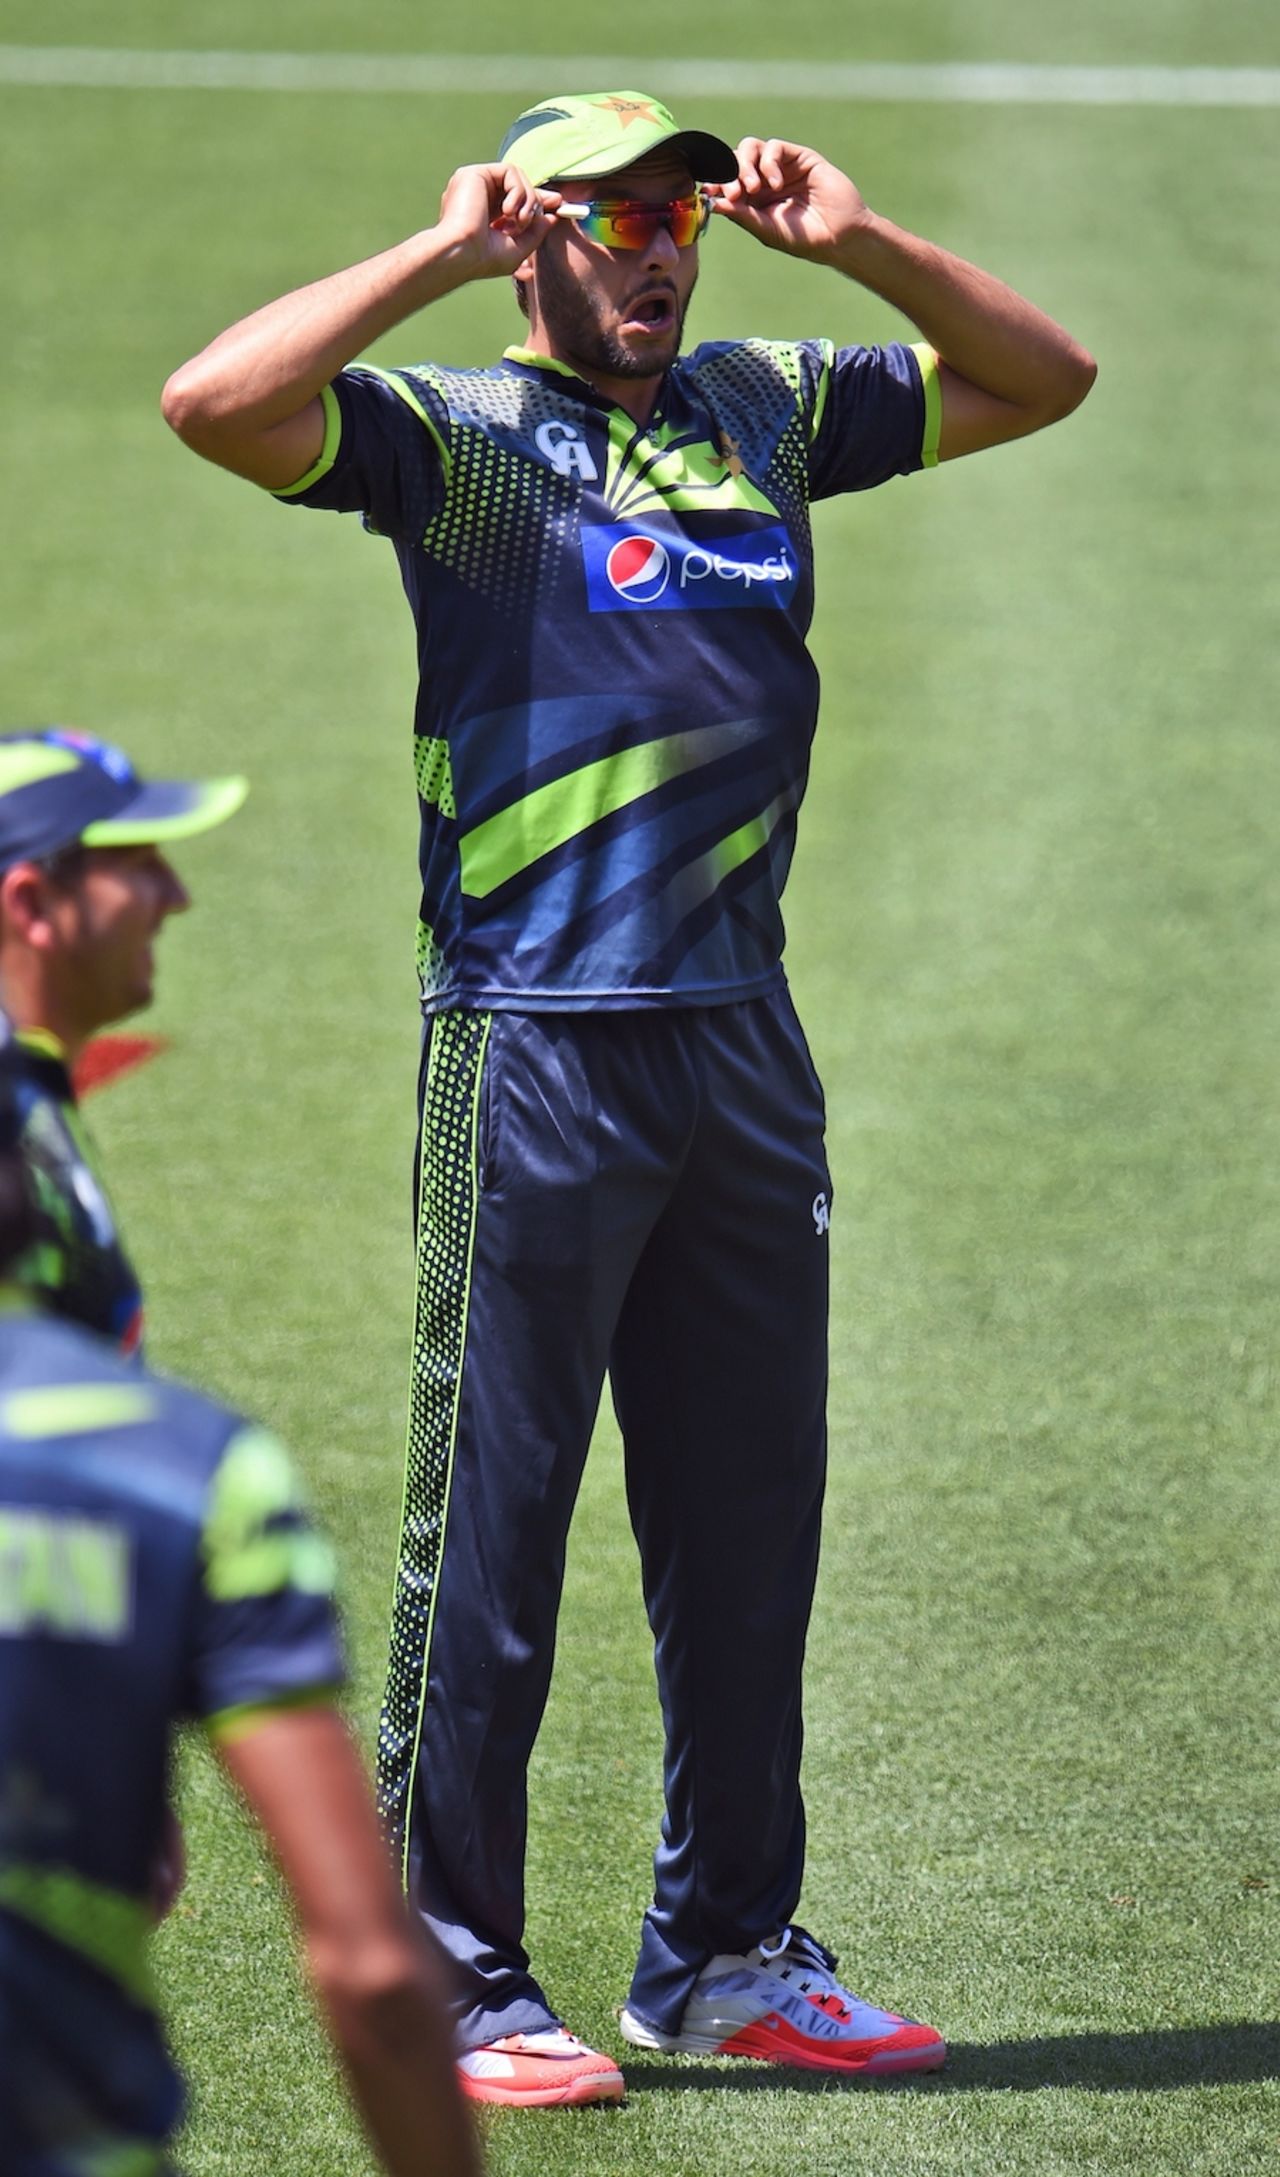 Match my style: Shahid Afridi trains ahead of a big match, World Cup 2015, Adelaide, February 14, 2015